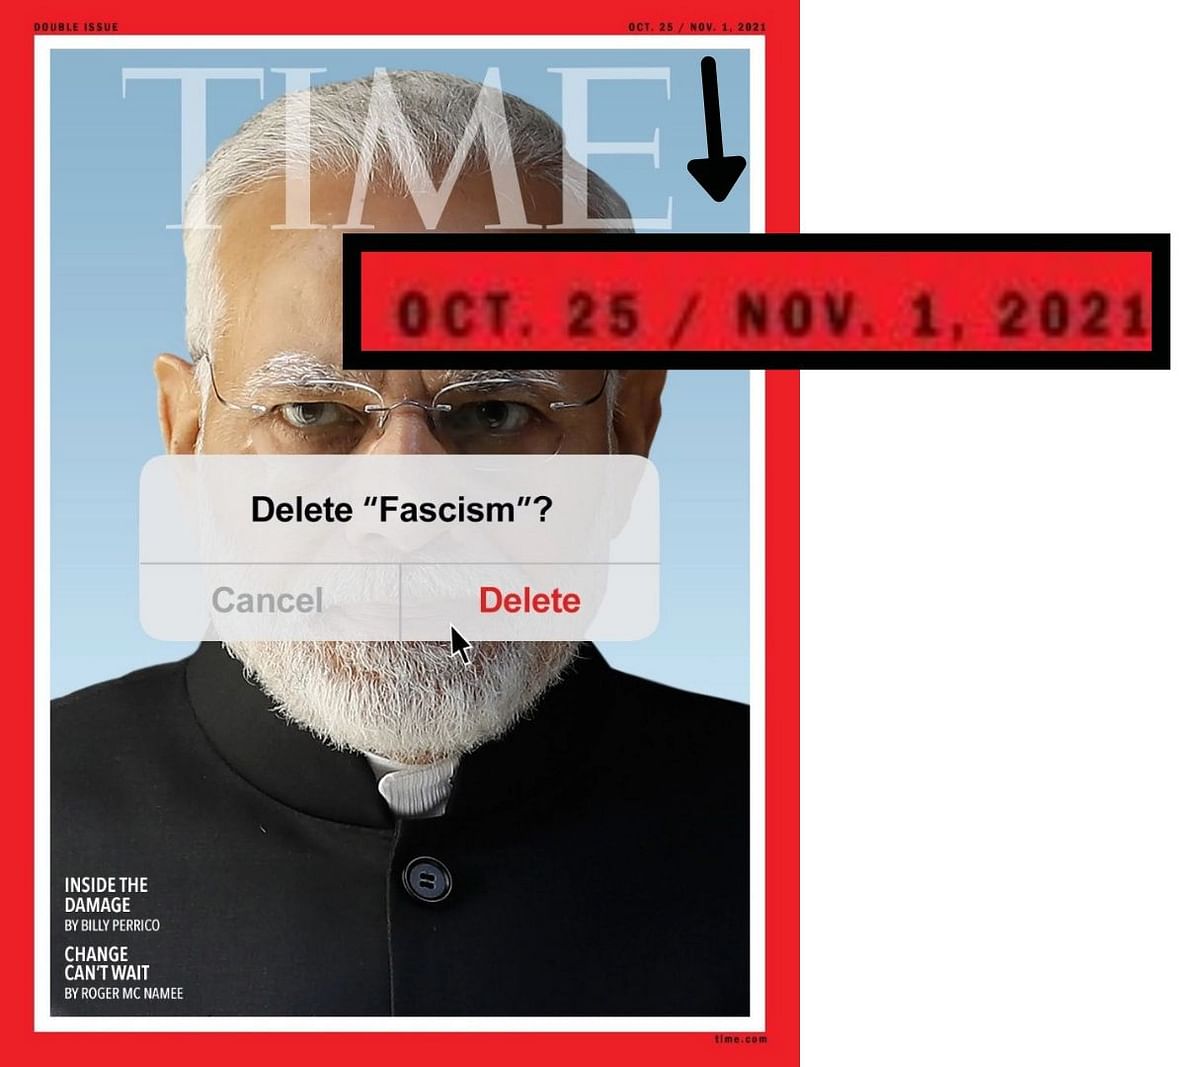 The real cover shows Facebook CEO Mark Zuckerberg's face with the words 'Delete Facebook' across it and not PM Modi.